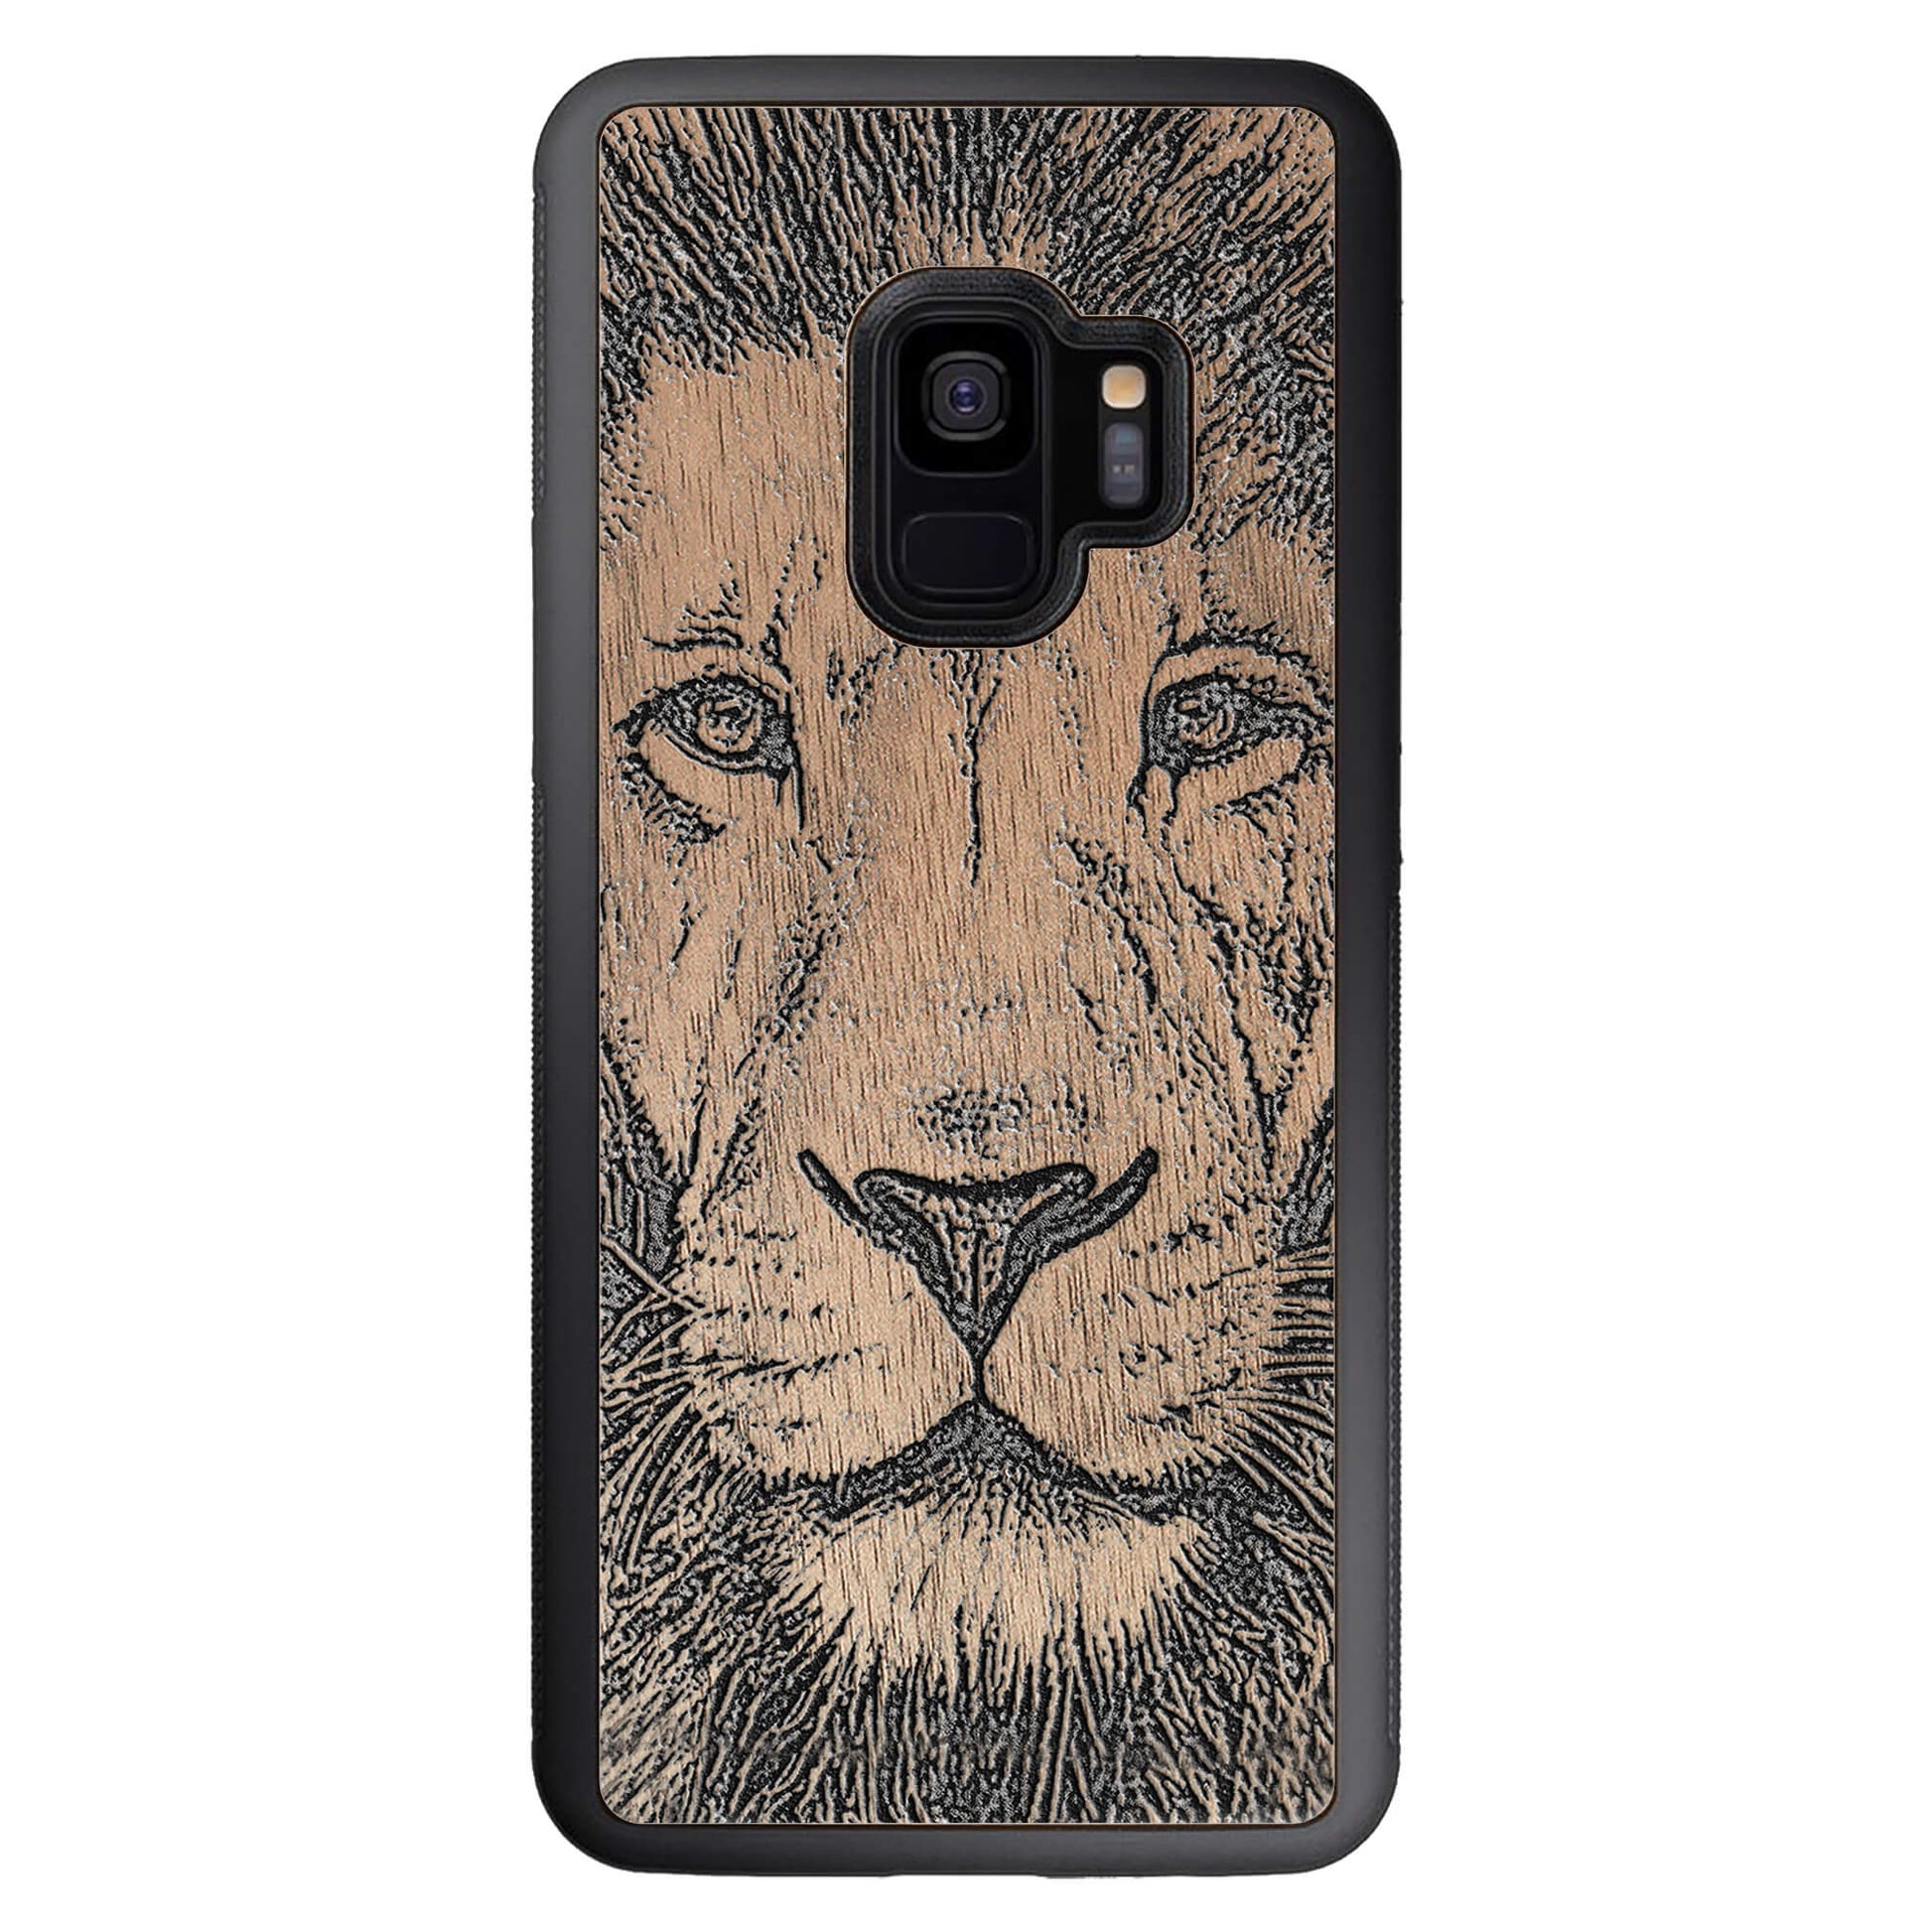 Wooden Case for Samsung Galaxy S9 Lion face